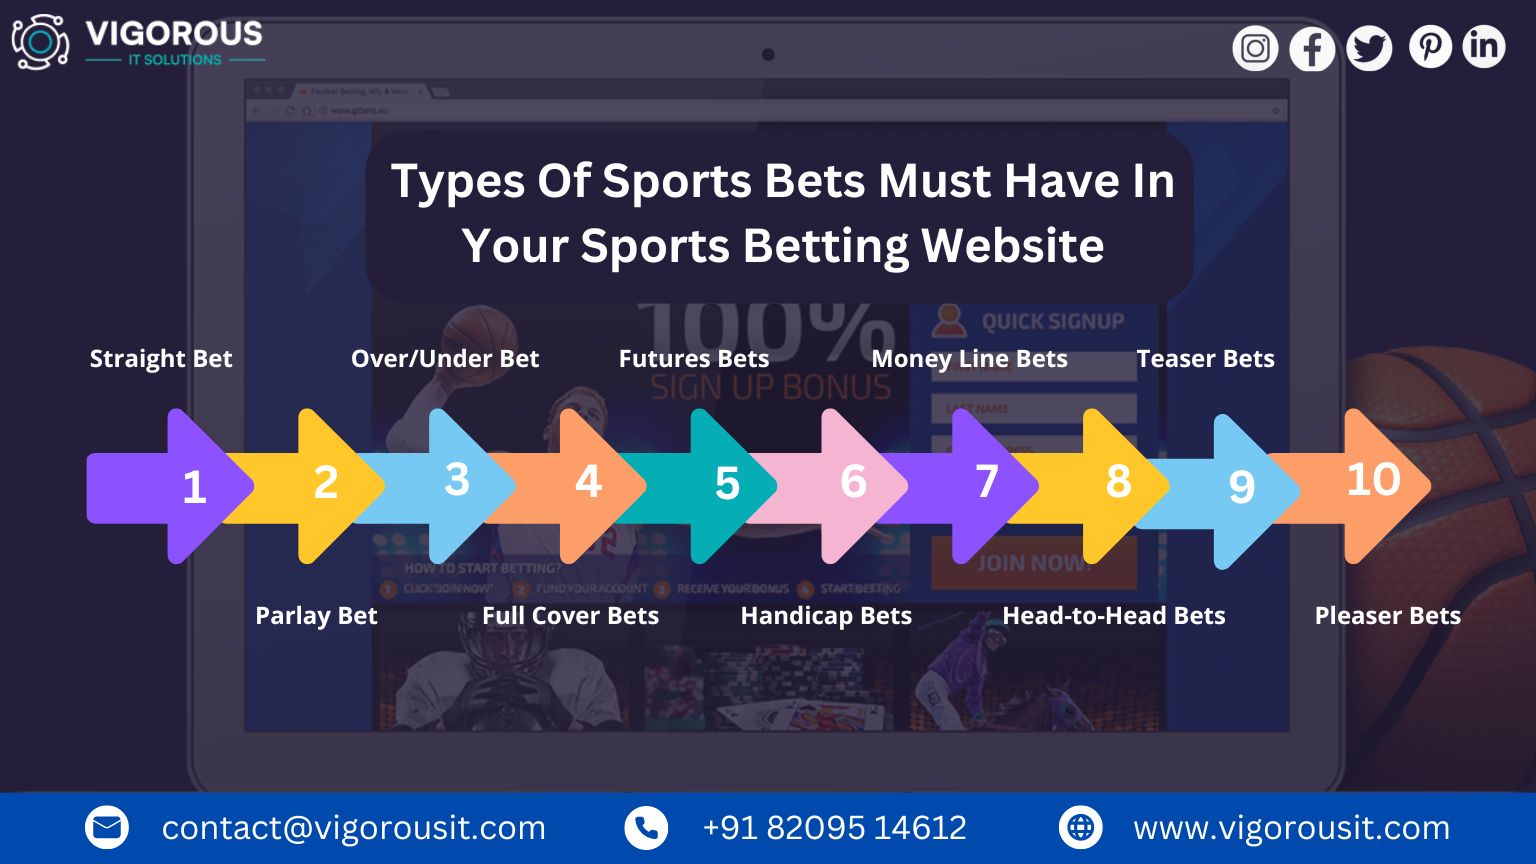 Types Of Sports Bets Must Have In Your Sports Betting Website